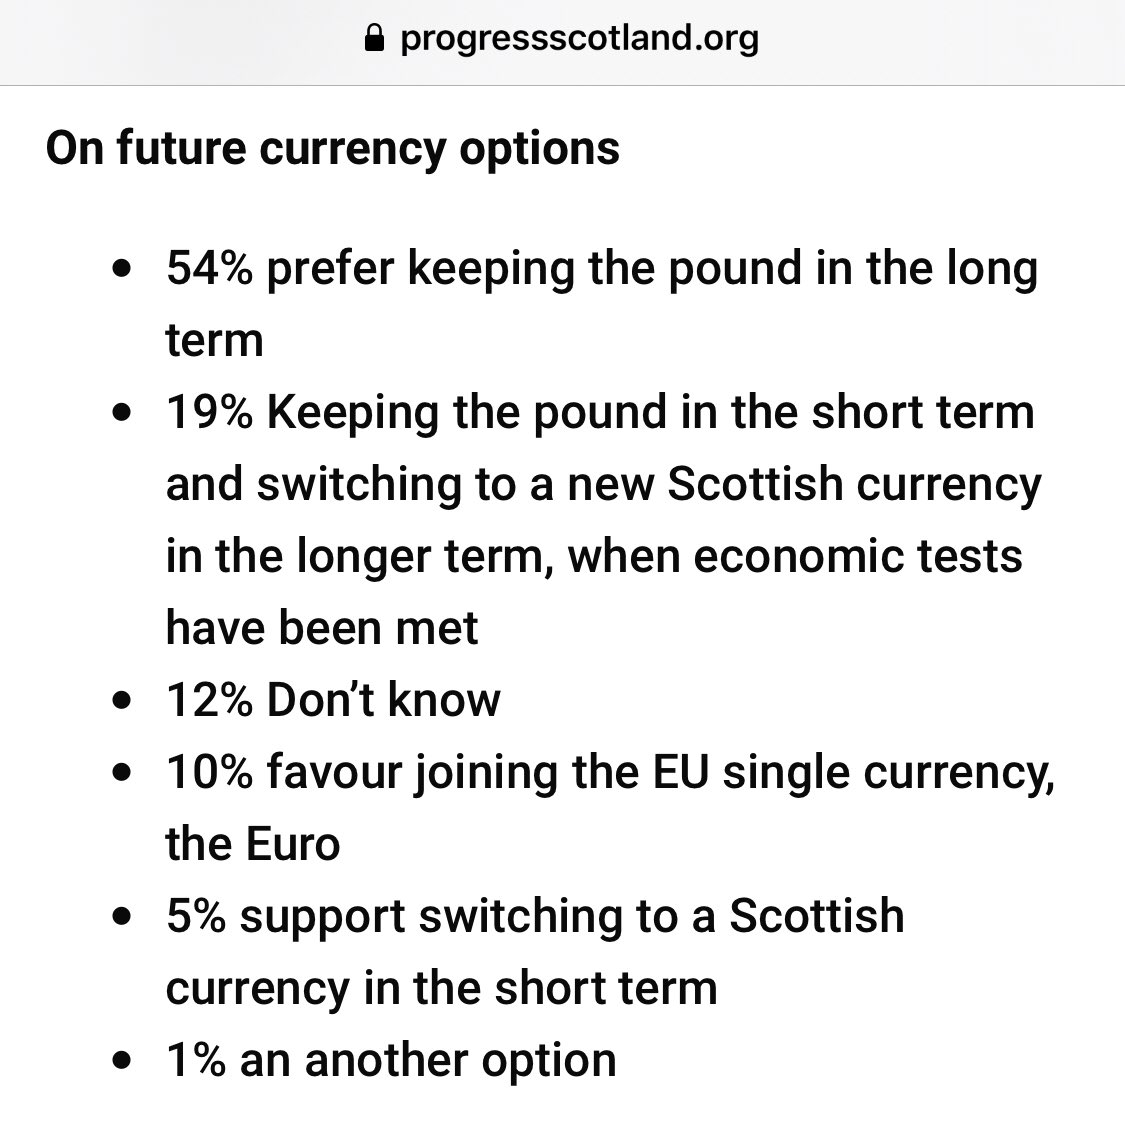 the option most people prefer is not a credible option for an independent country seeking to be in control of its economic destiny - and is certainly incompatible with joining the EU (2/n)